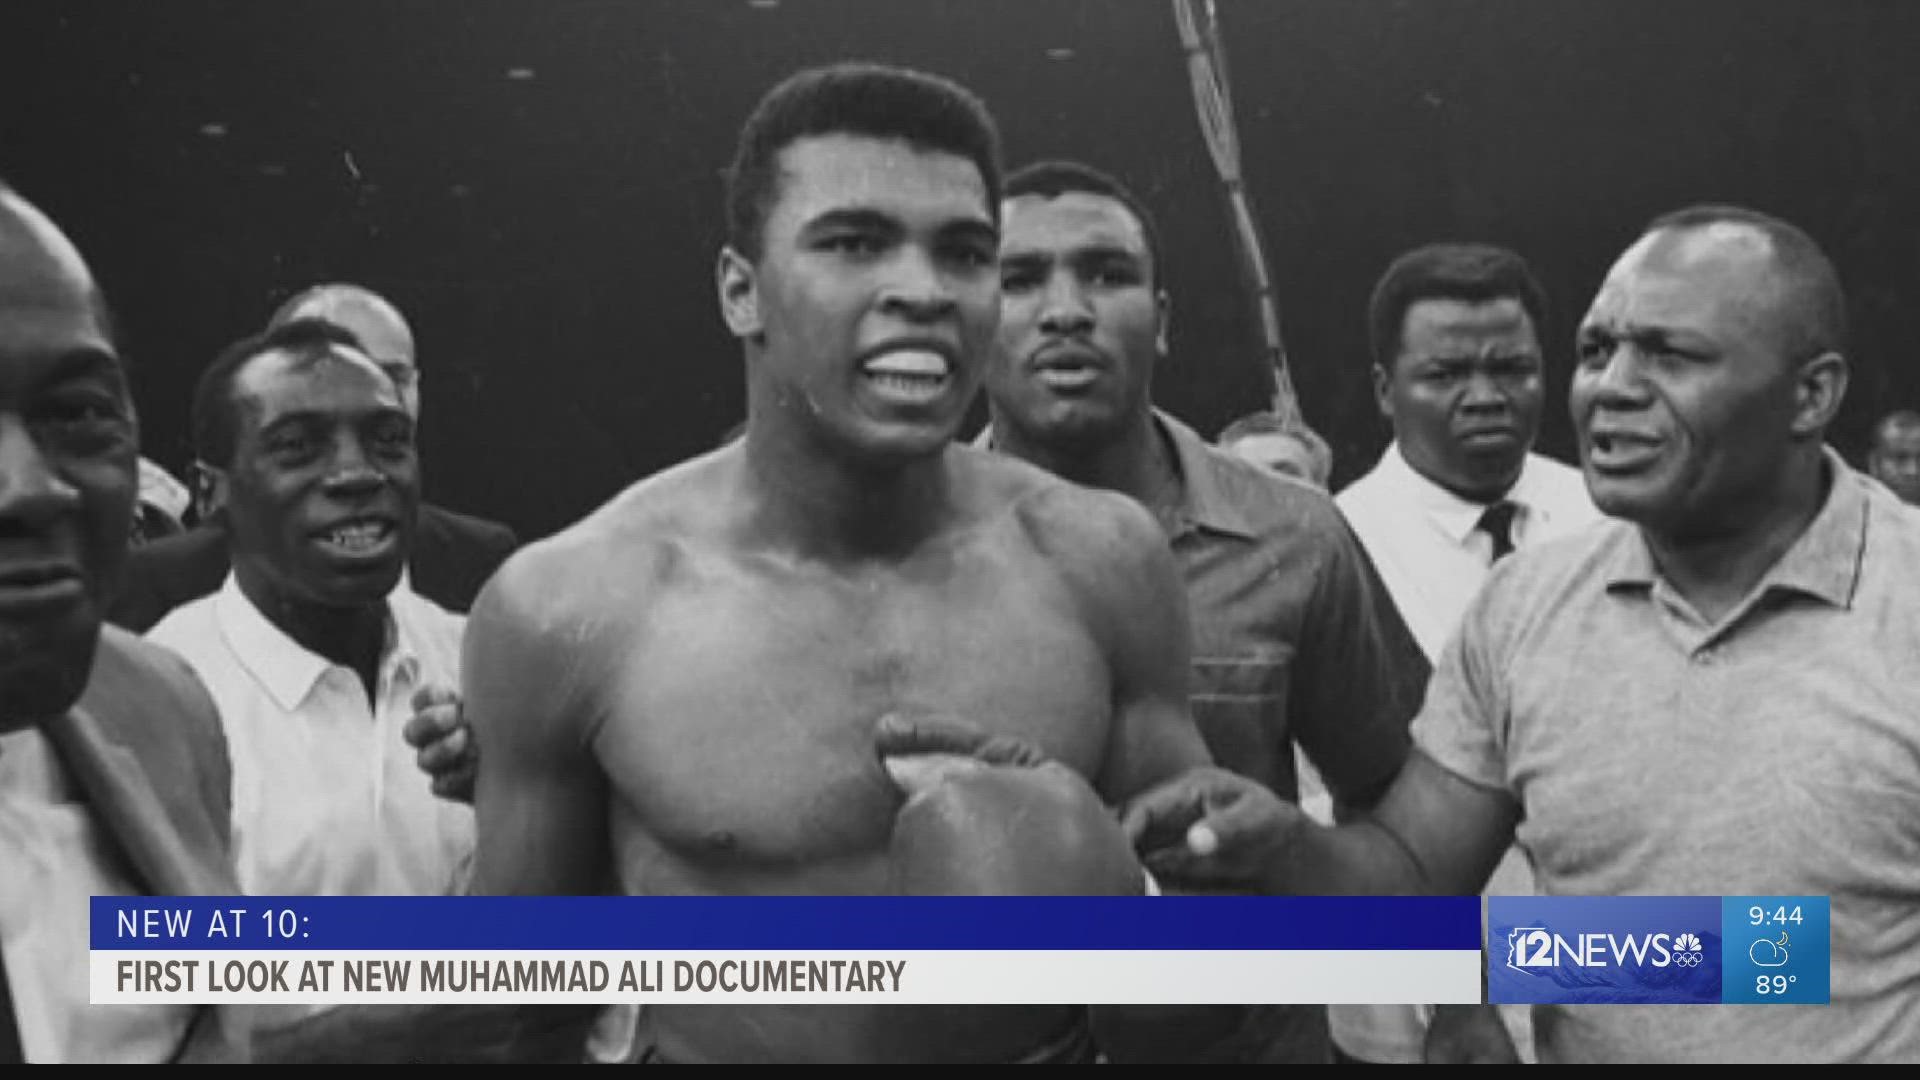 The greatest boxer of all time called the Valley home for many years before his death, and now there's a new documentary on the legend's life.